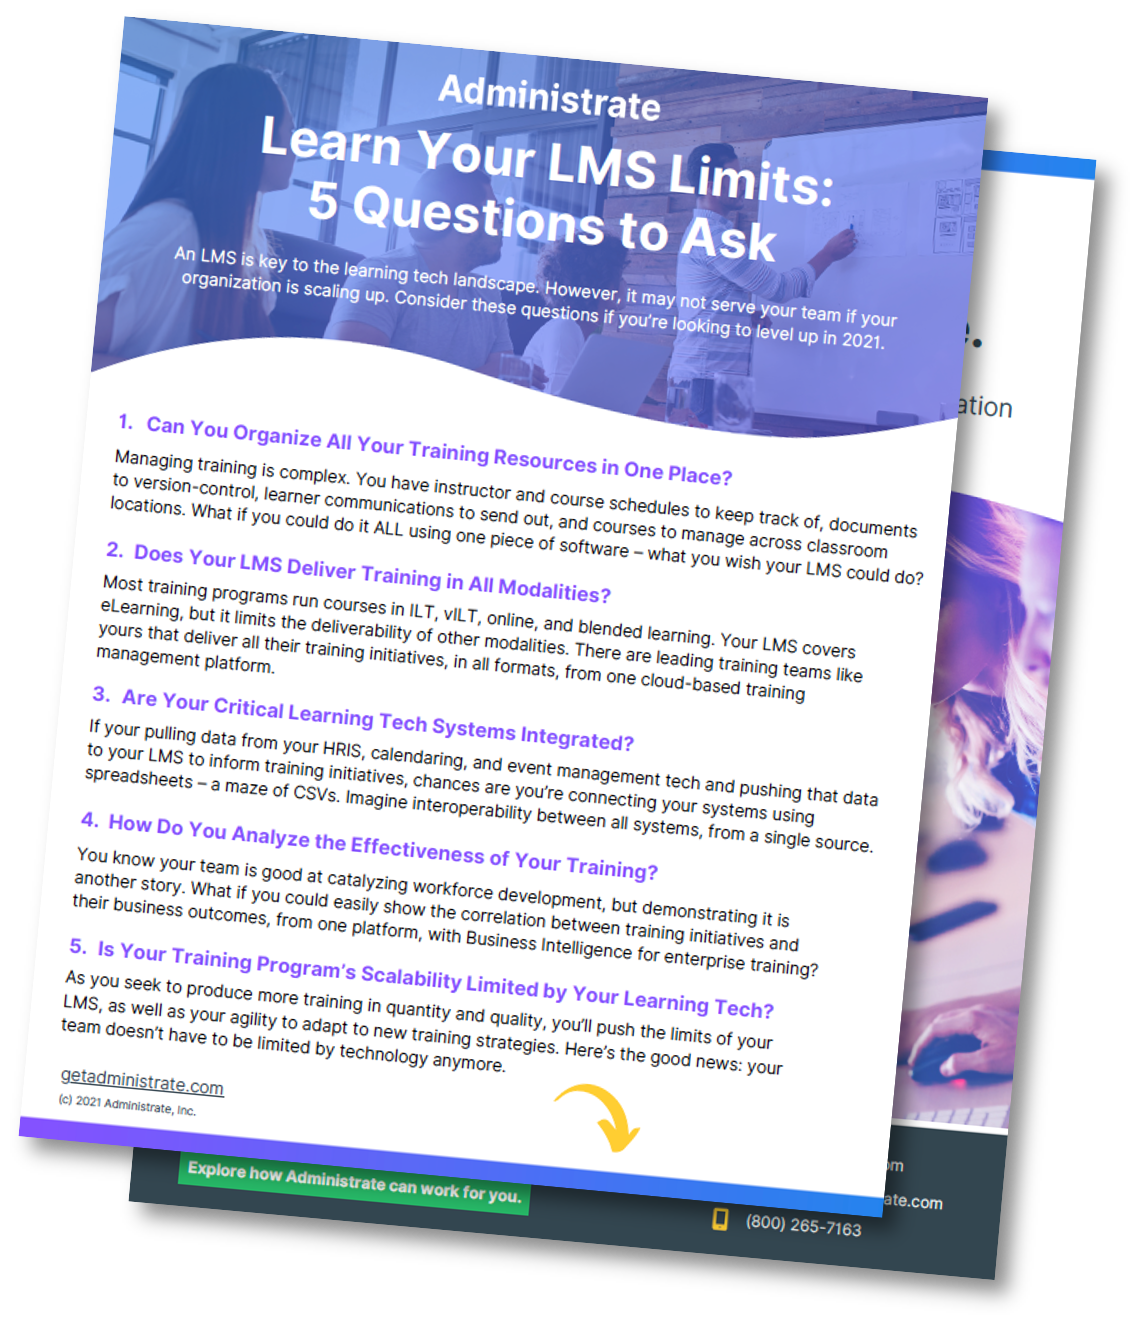 Get the LMS One-Pager Today to Evaluate Your LMS with these 5 Questions!